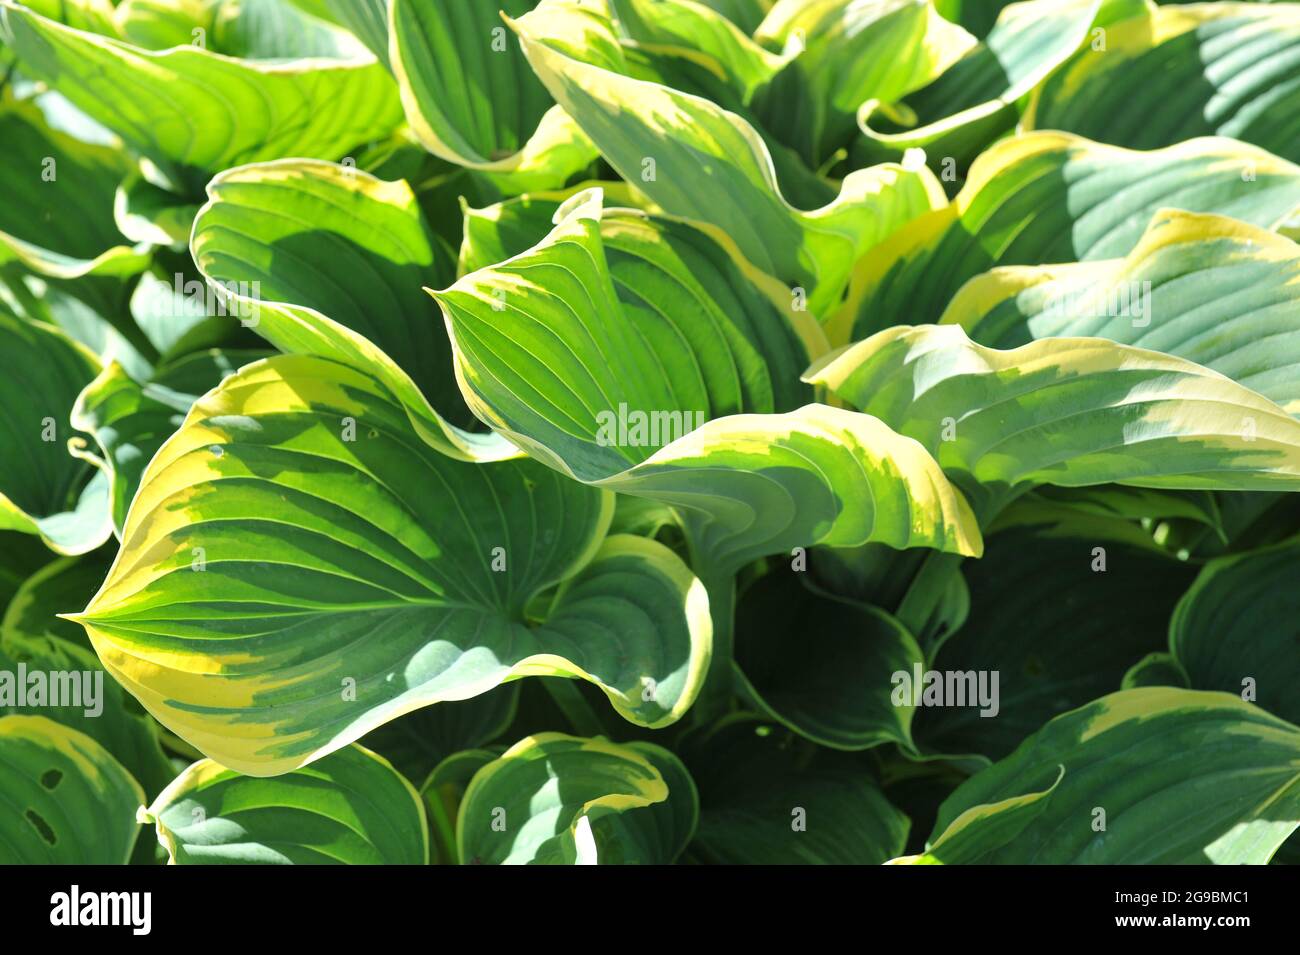 Giant Hosta Sagae with large variegated bluish-green leaves grows in a garden in May Stock Photo